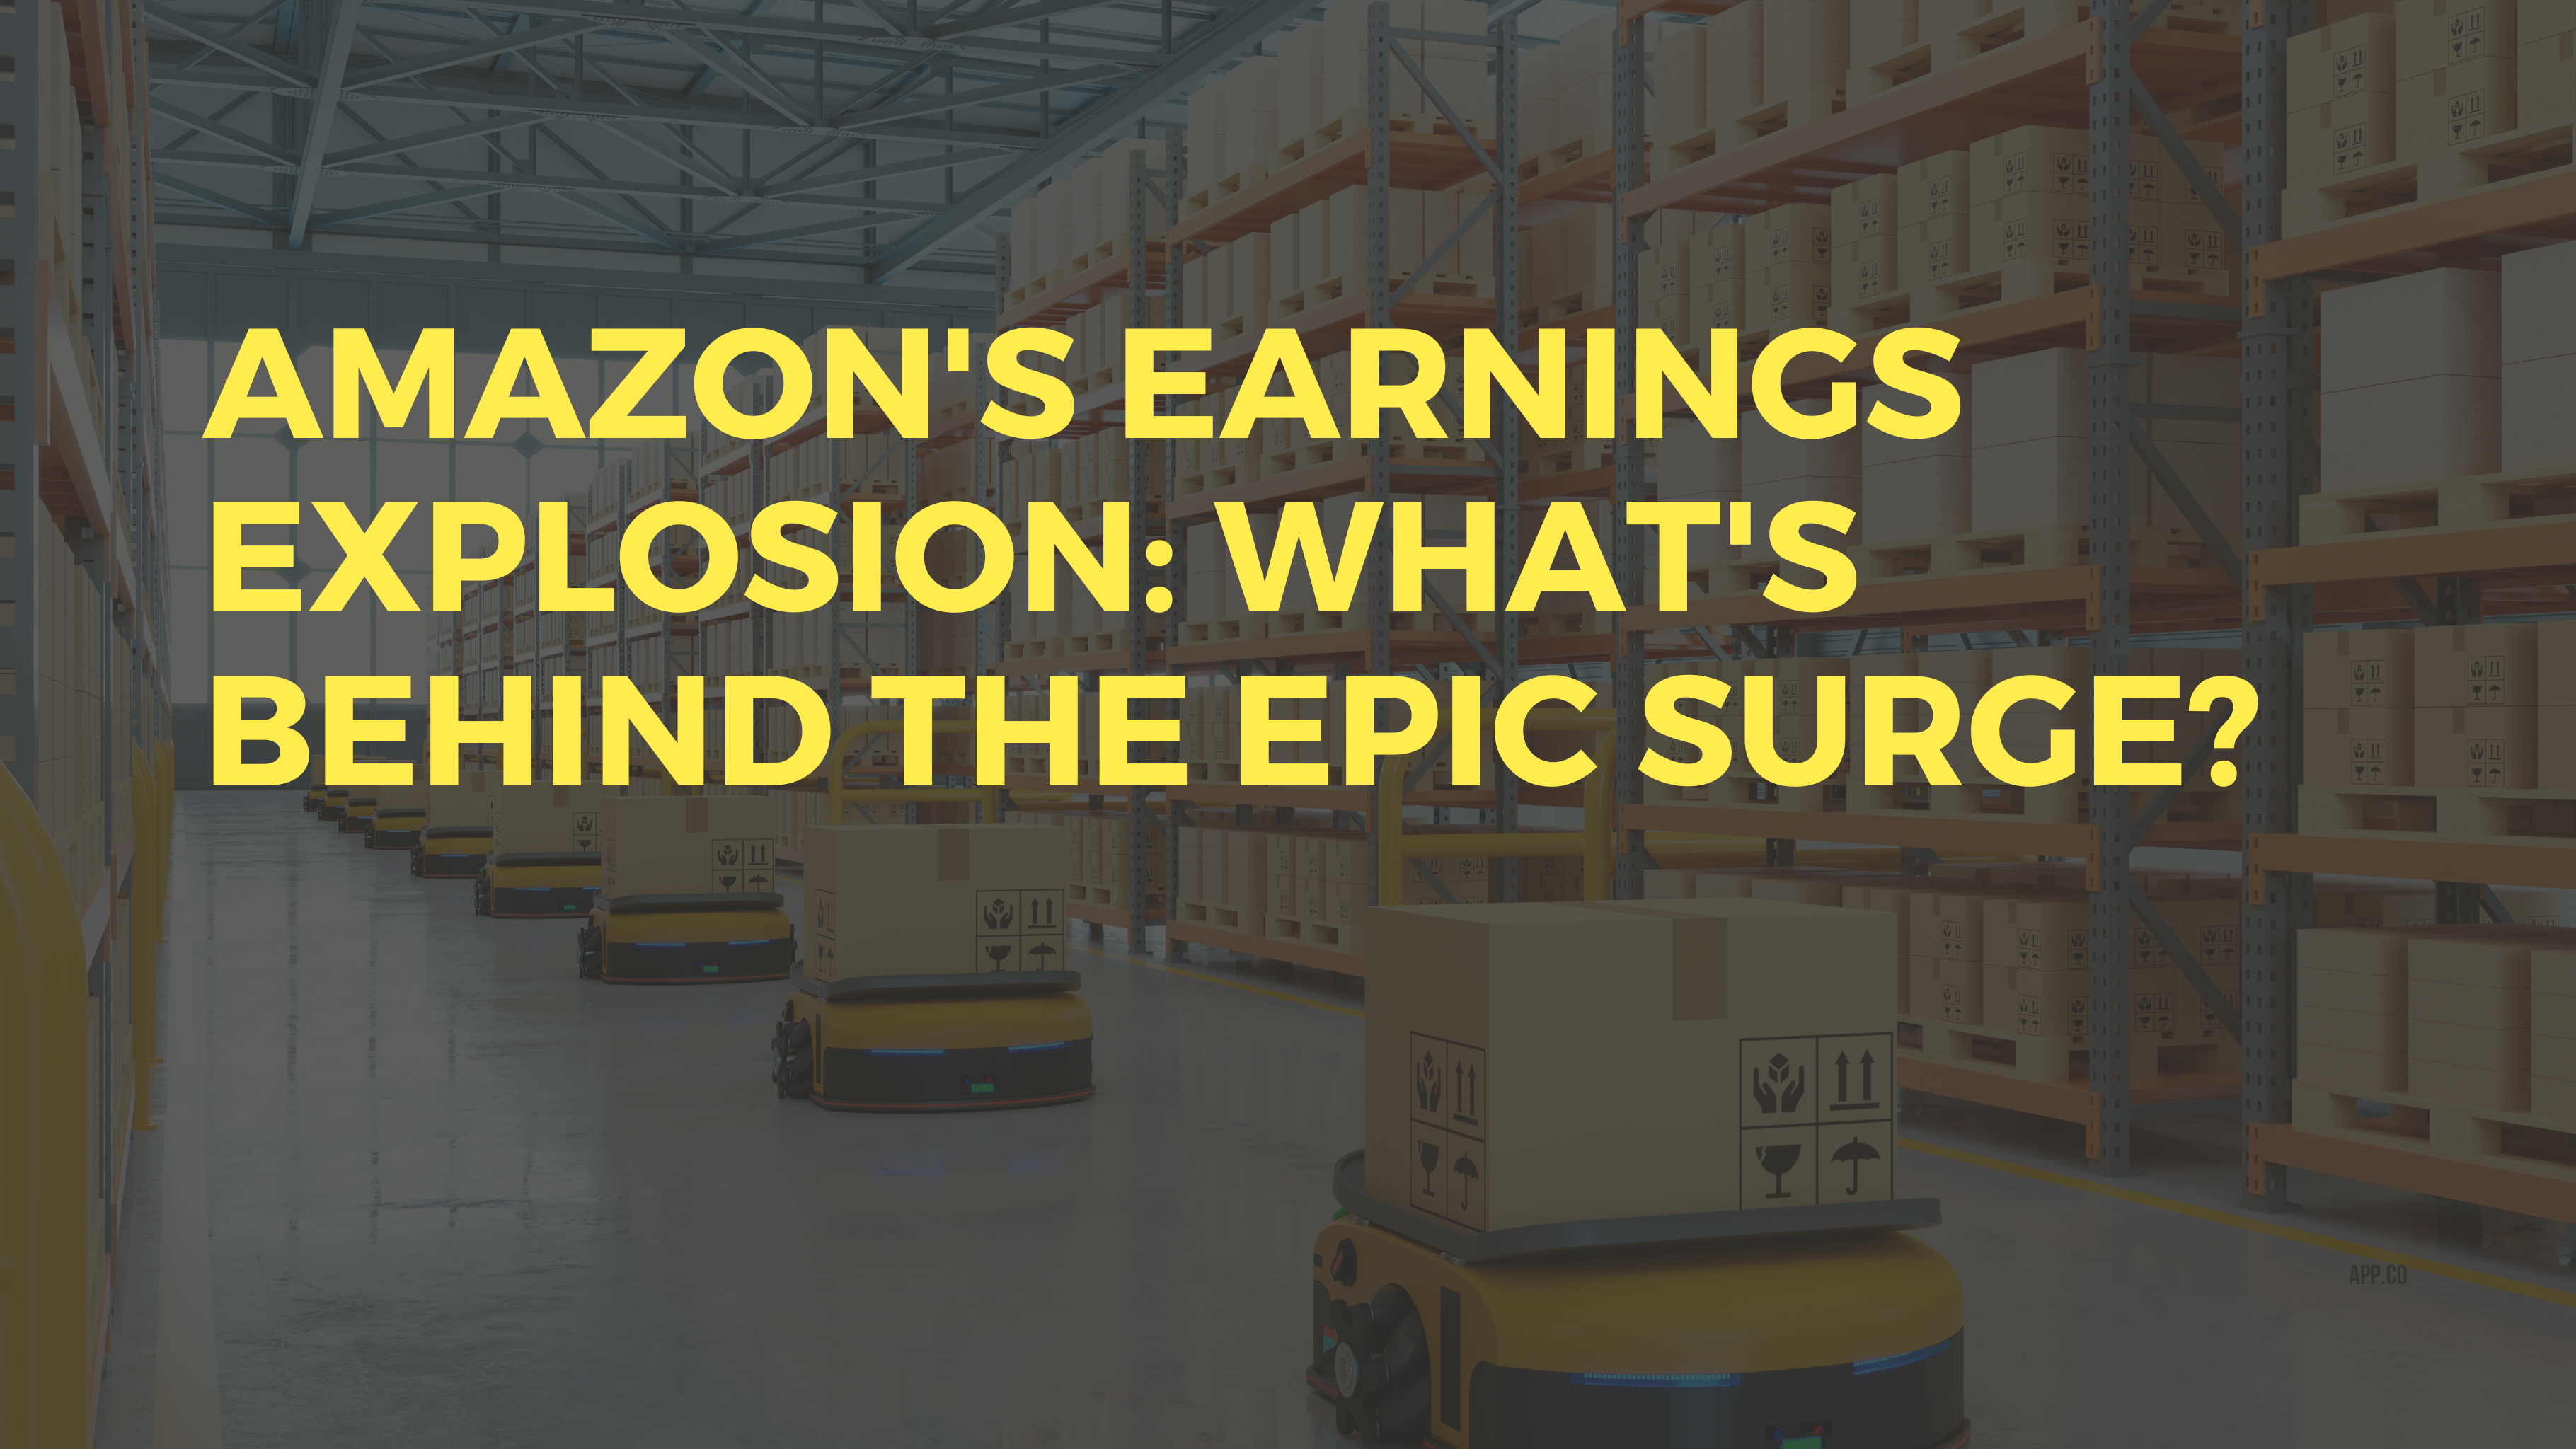 Amazon's Earnings Explosion: What's Behind the Epic Surge?